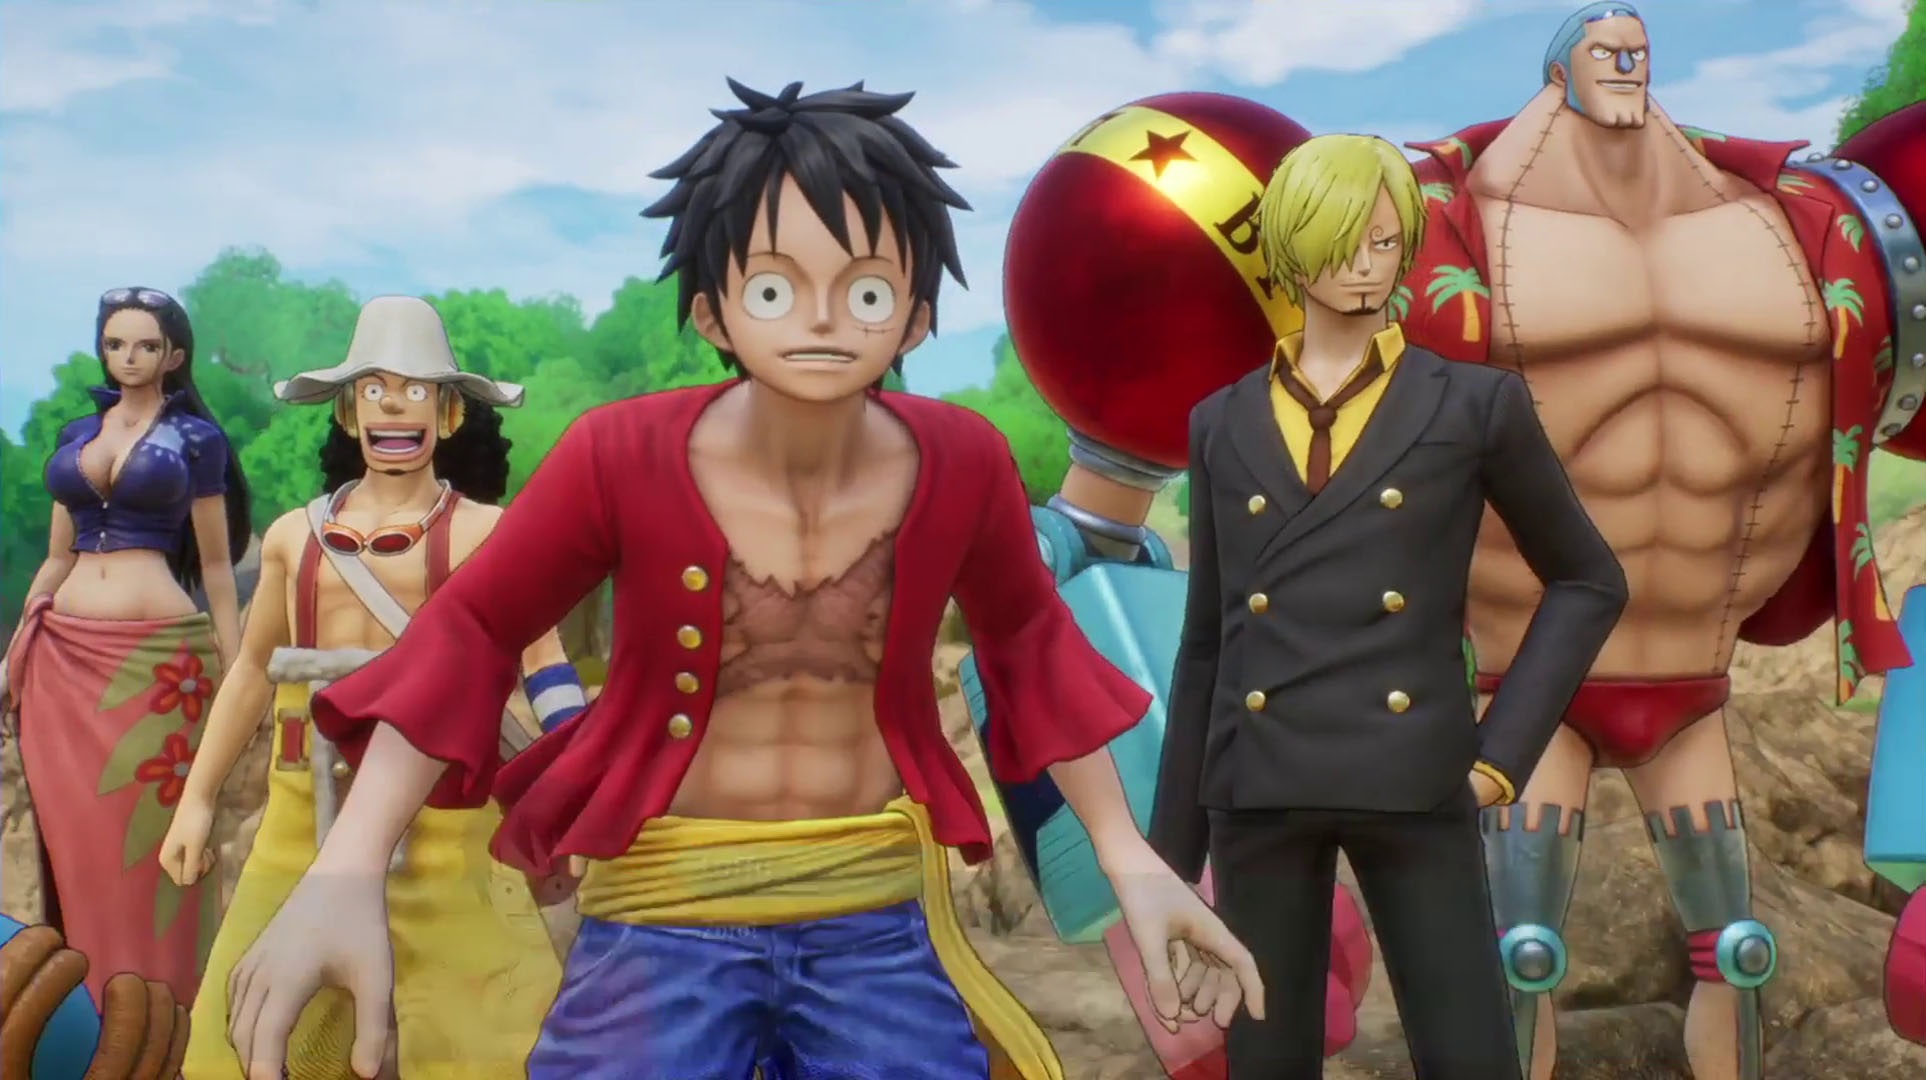 Can I Watch Netflix's 'One Piece' If I've Never Seen the Anime?